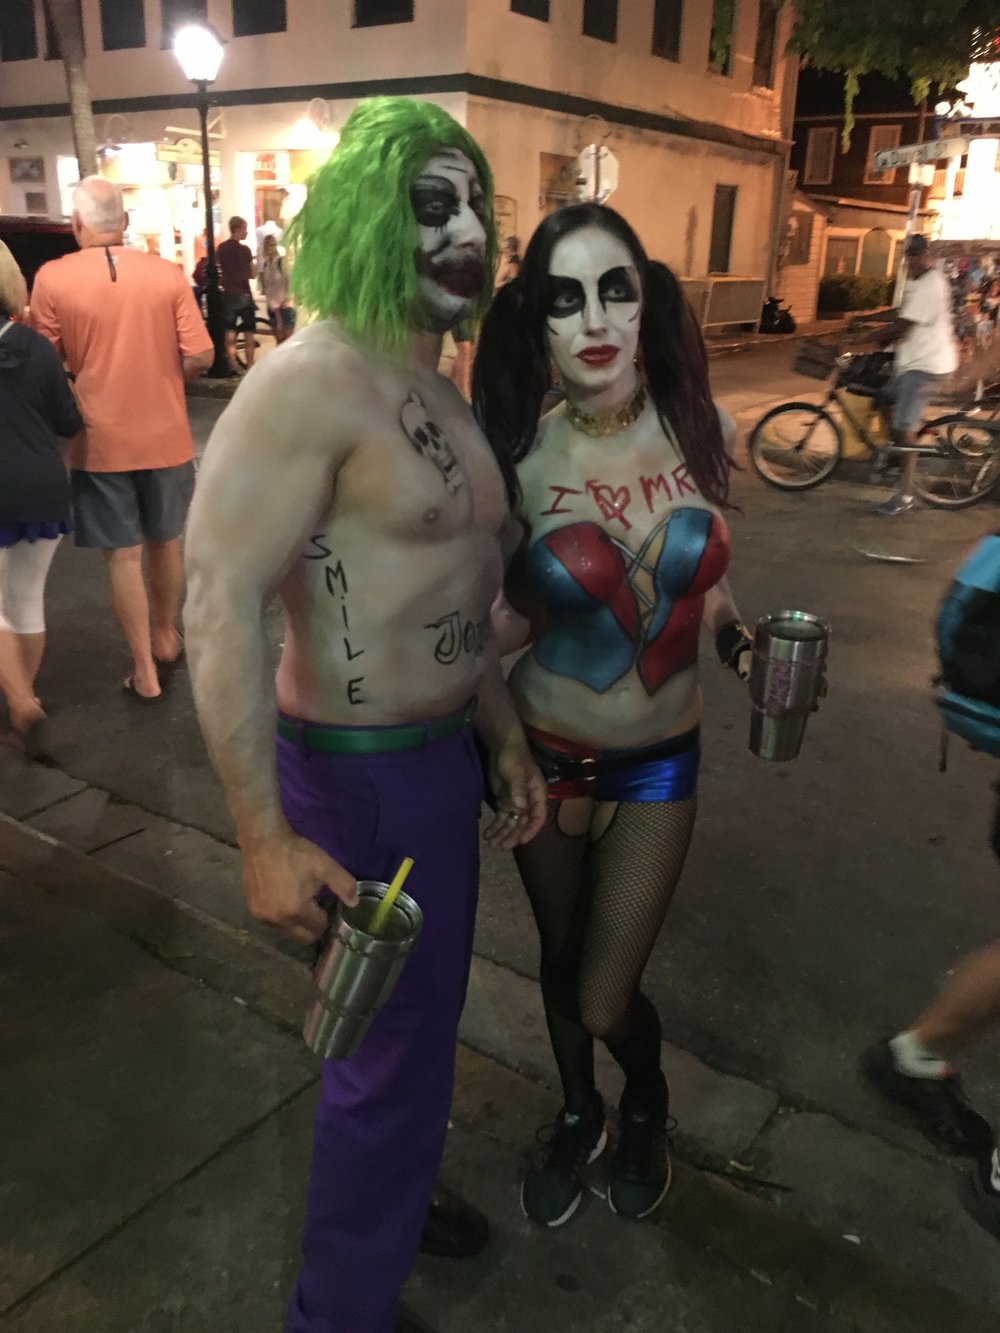  fantasy fest 2016 key west crowd shots pictures body paint nudity costume joker harley quinn 